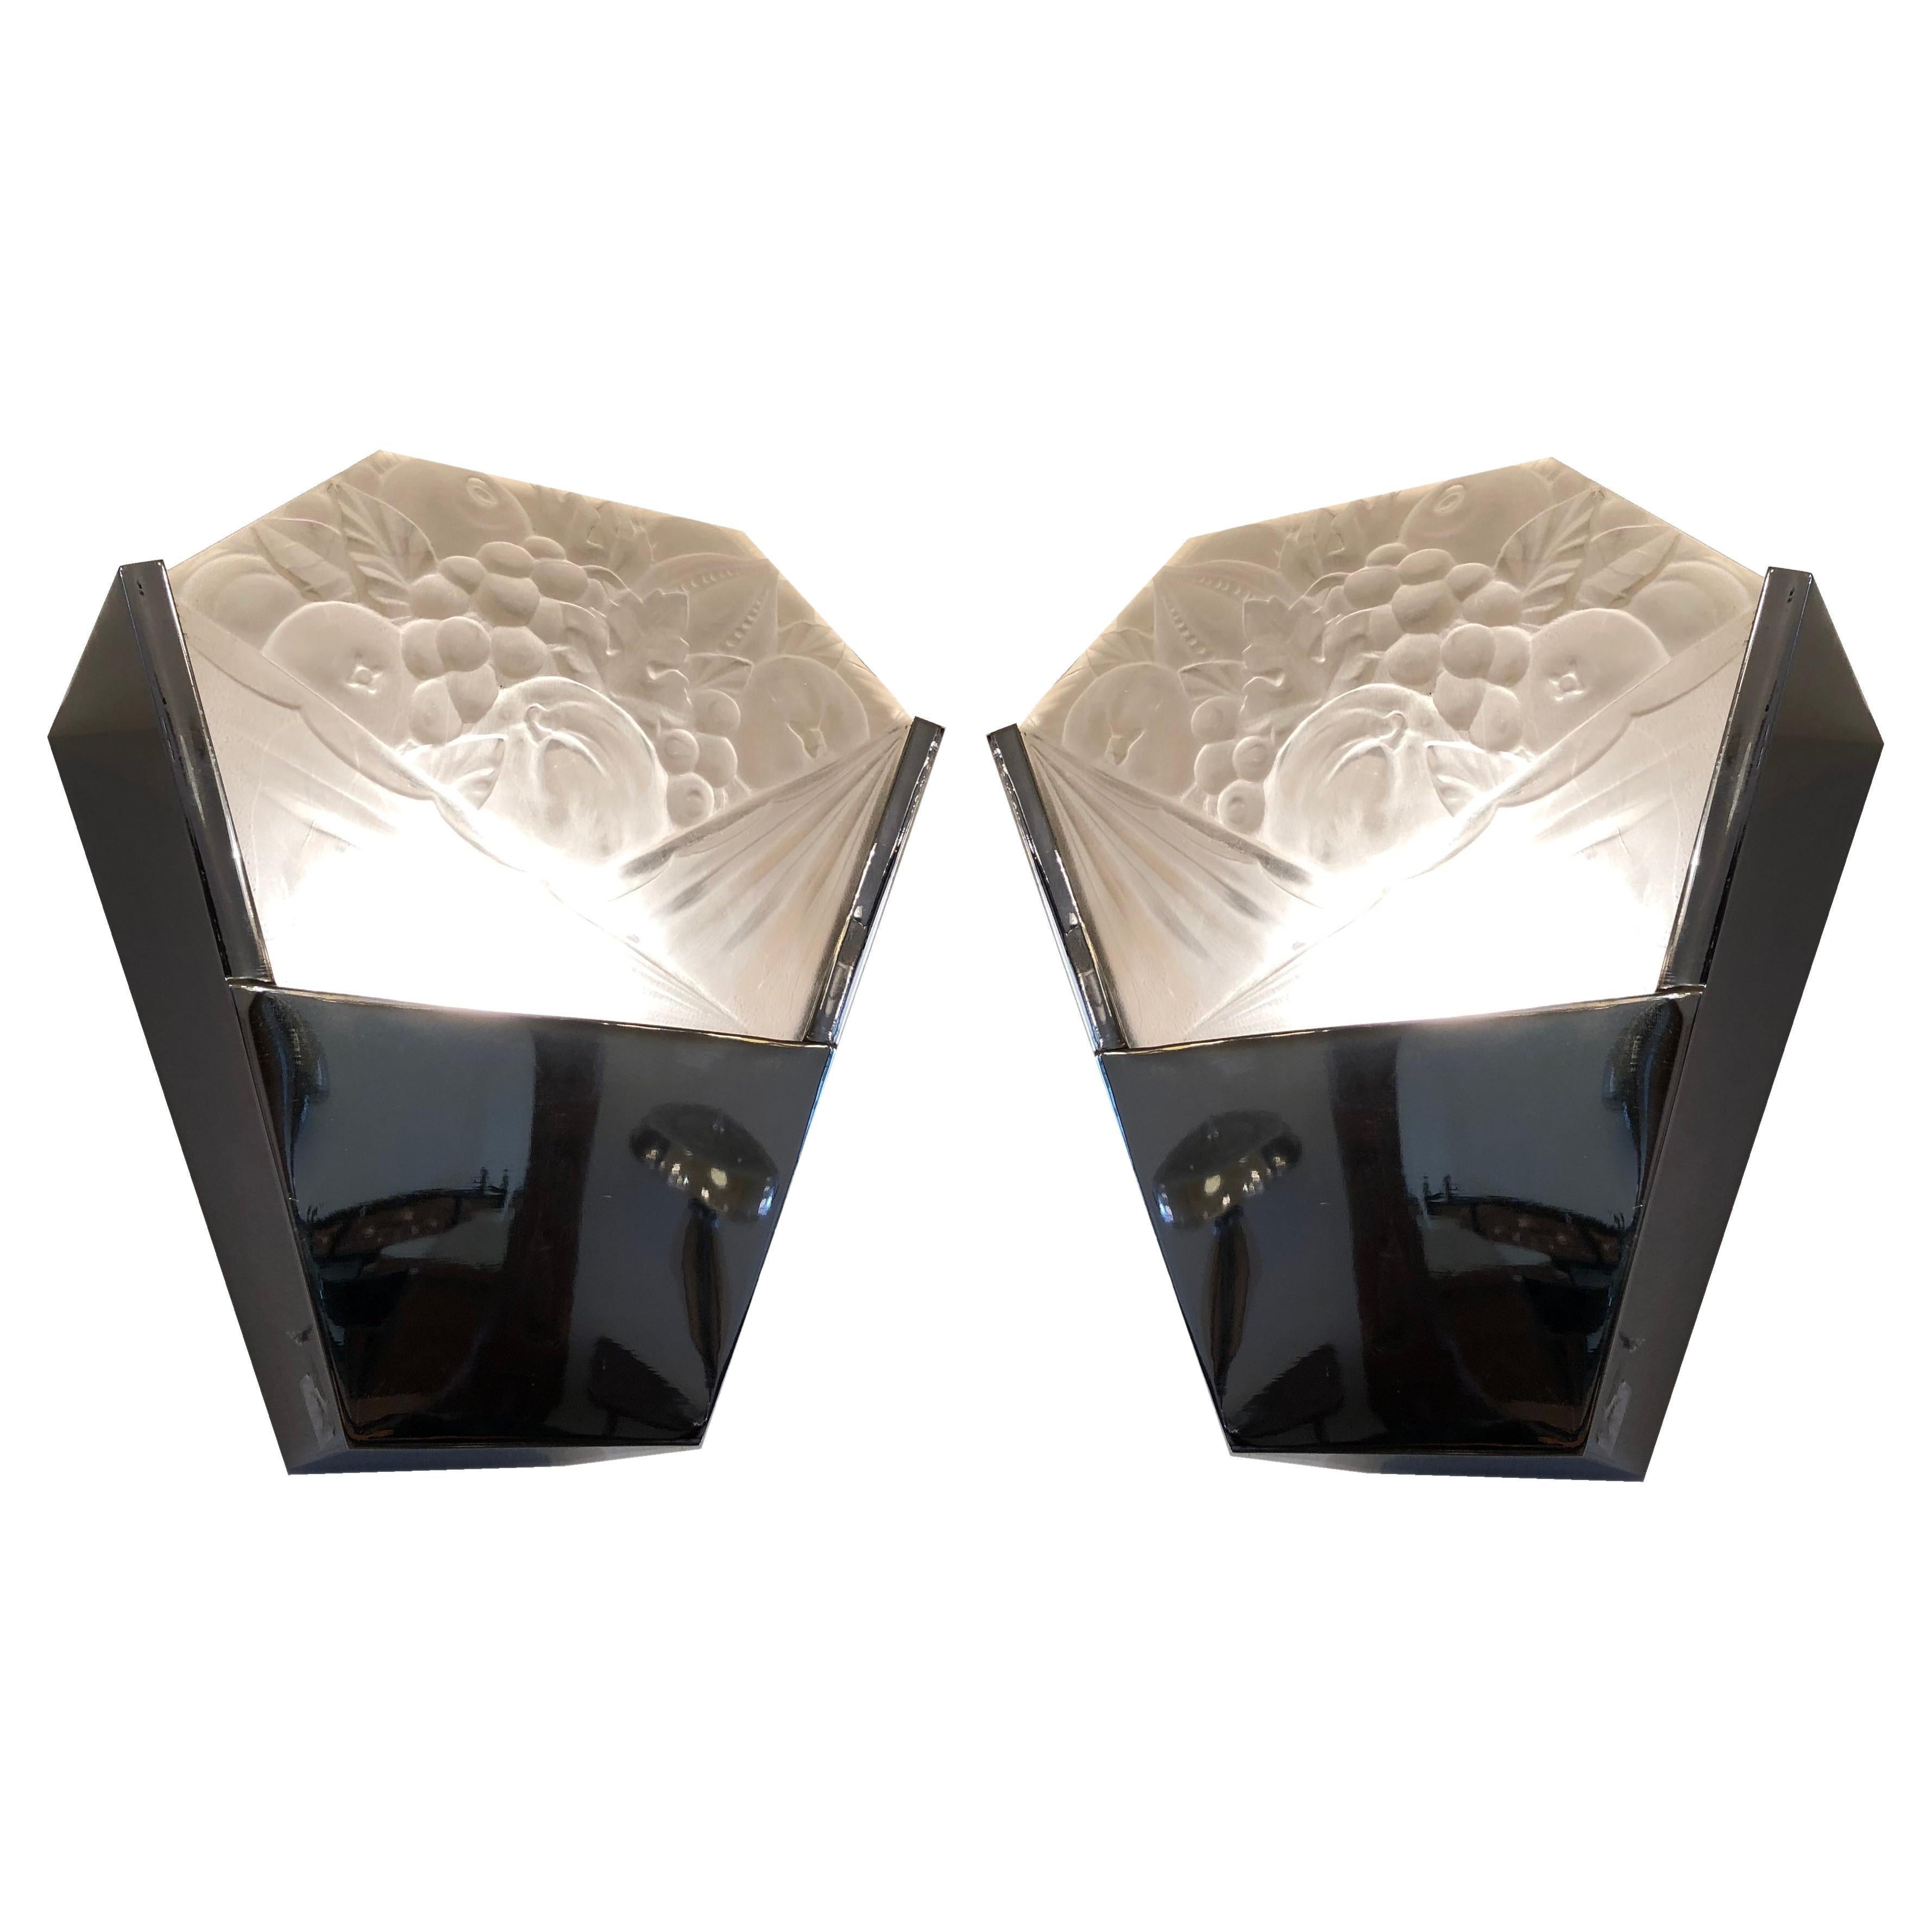 2 Sconces Style: Art Deco, French, 1920 